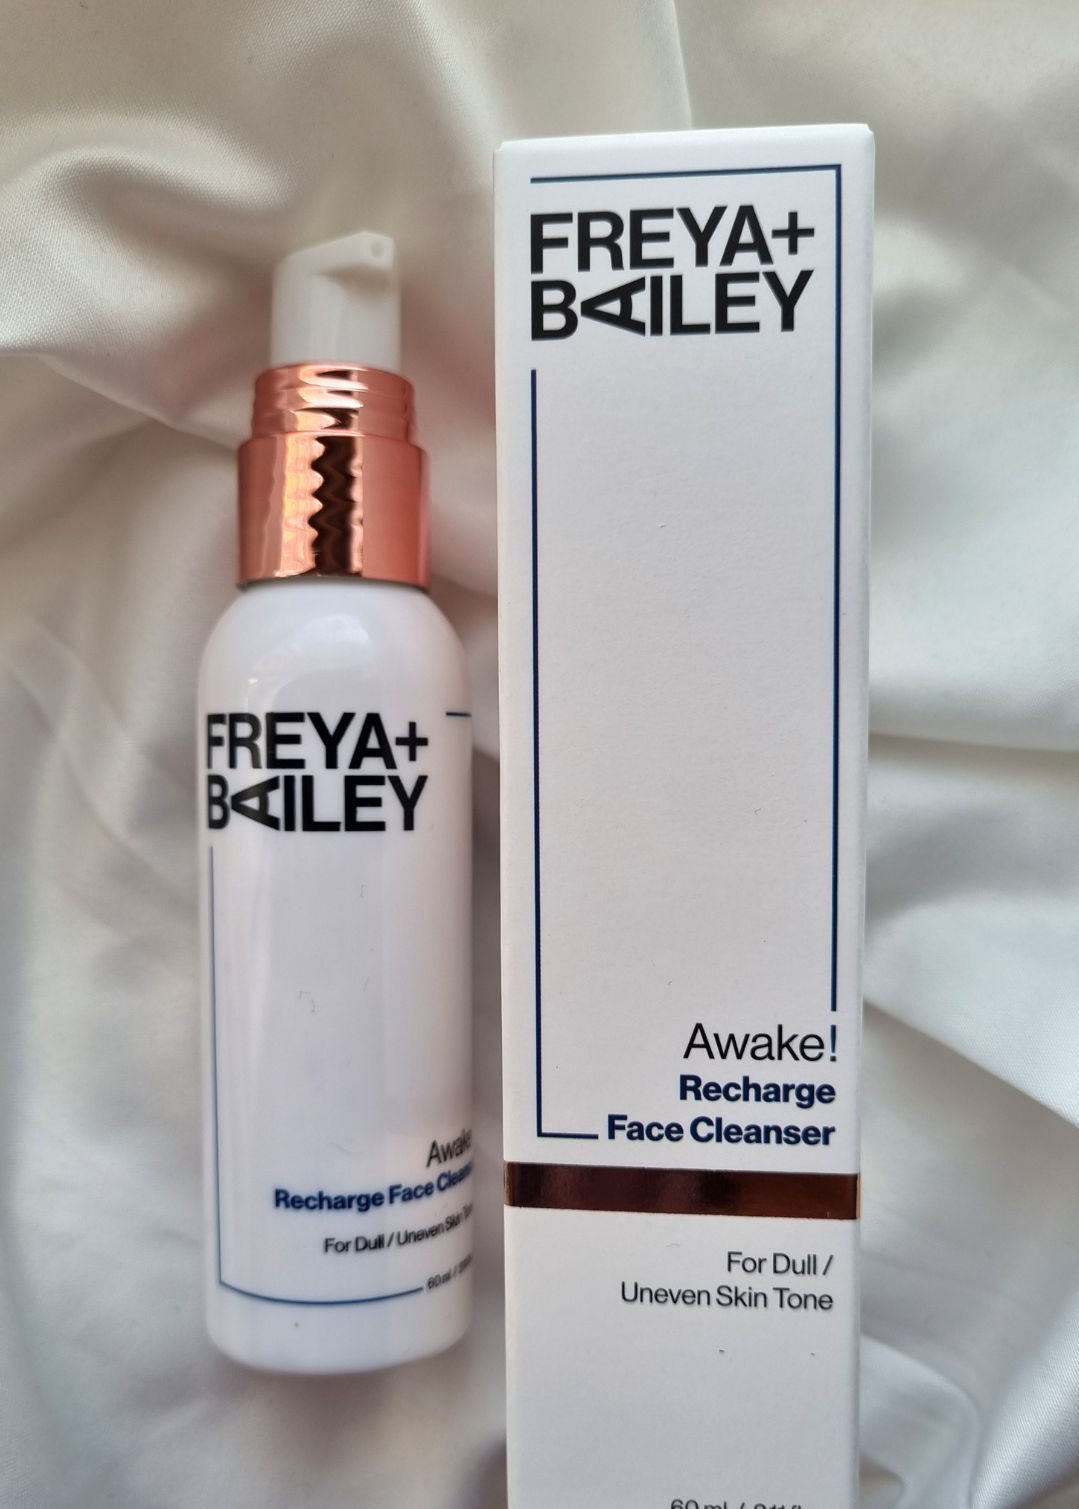 Awake Recharge Face Cleanser